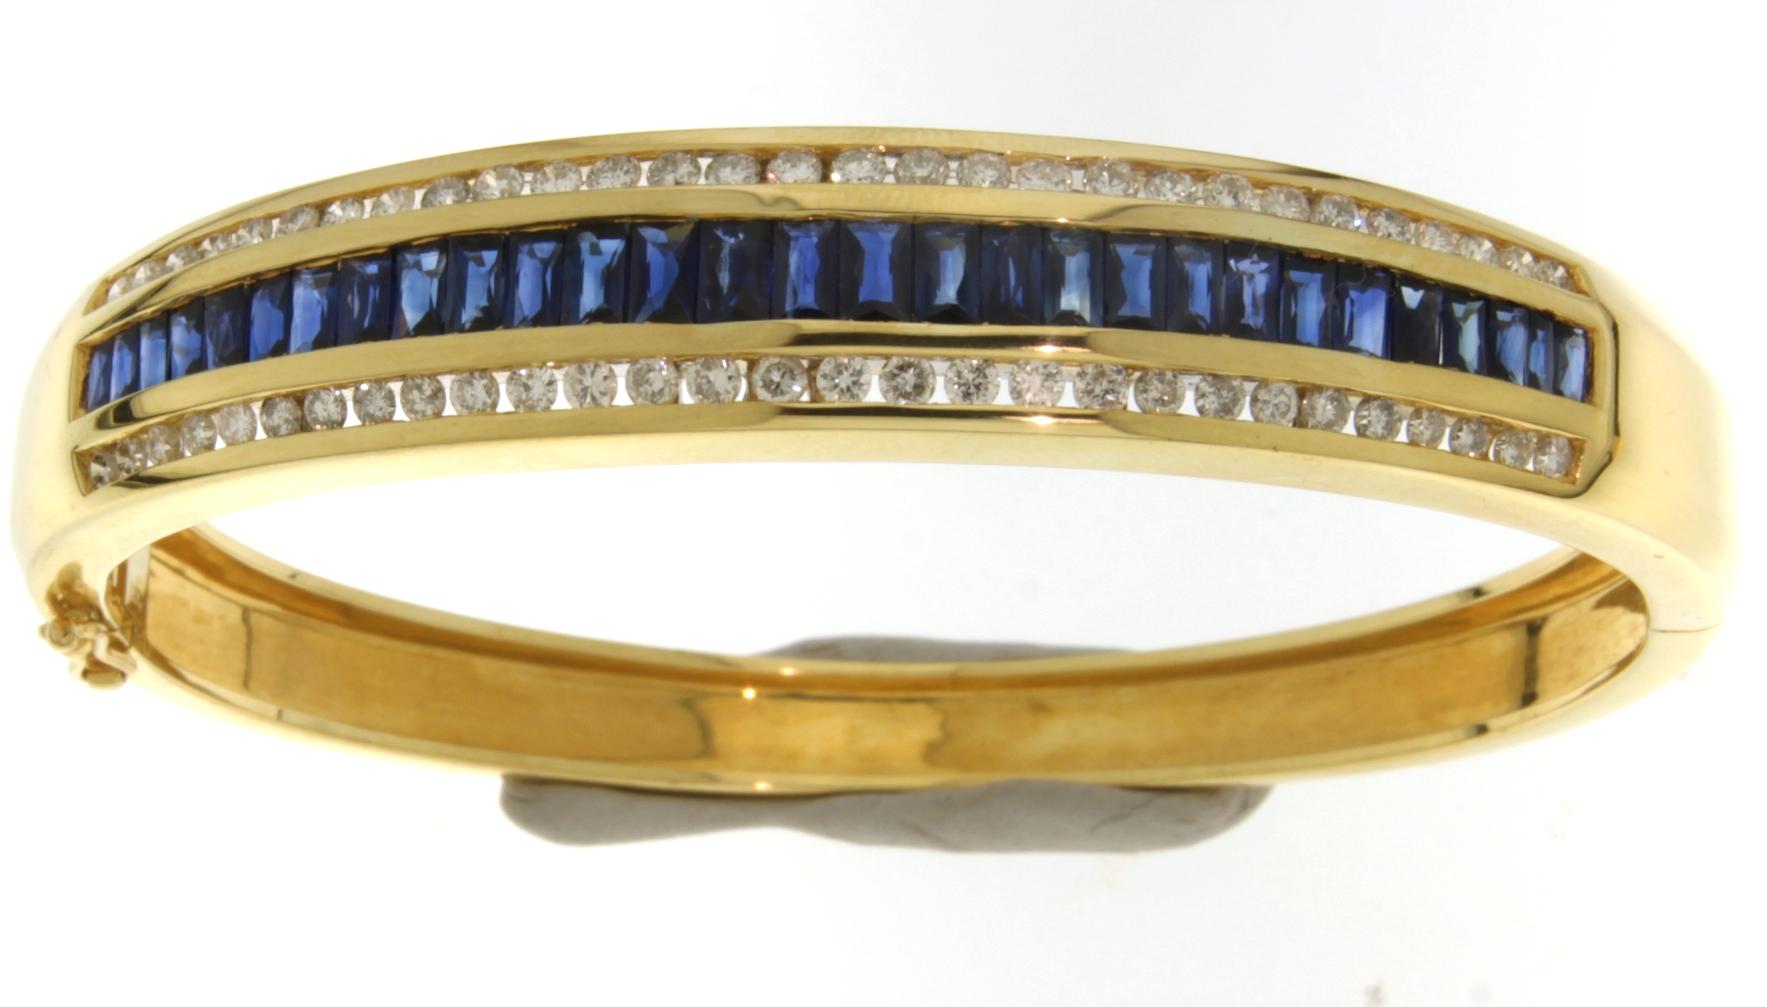 18kt Yellow Gold Bangle Bracelet  3.5ct Sapphire Diamonds, CGL Certified

Incredible 18 kt yellow gold bangle bracelet with 29 sapphire stones, surrounding the sapphire stones are 2 rows of 29 brilliant cut diamonds on each row (together 58